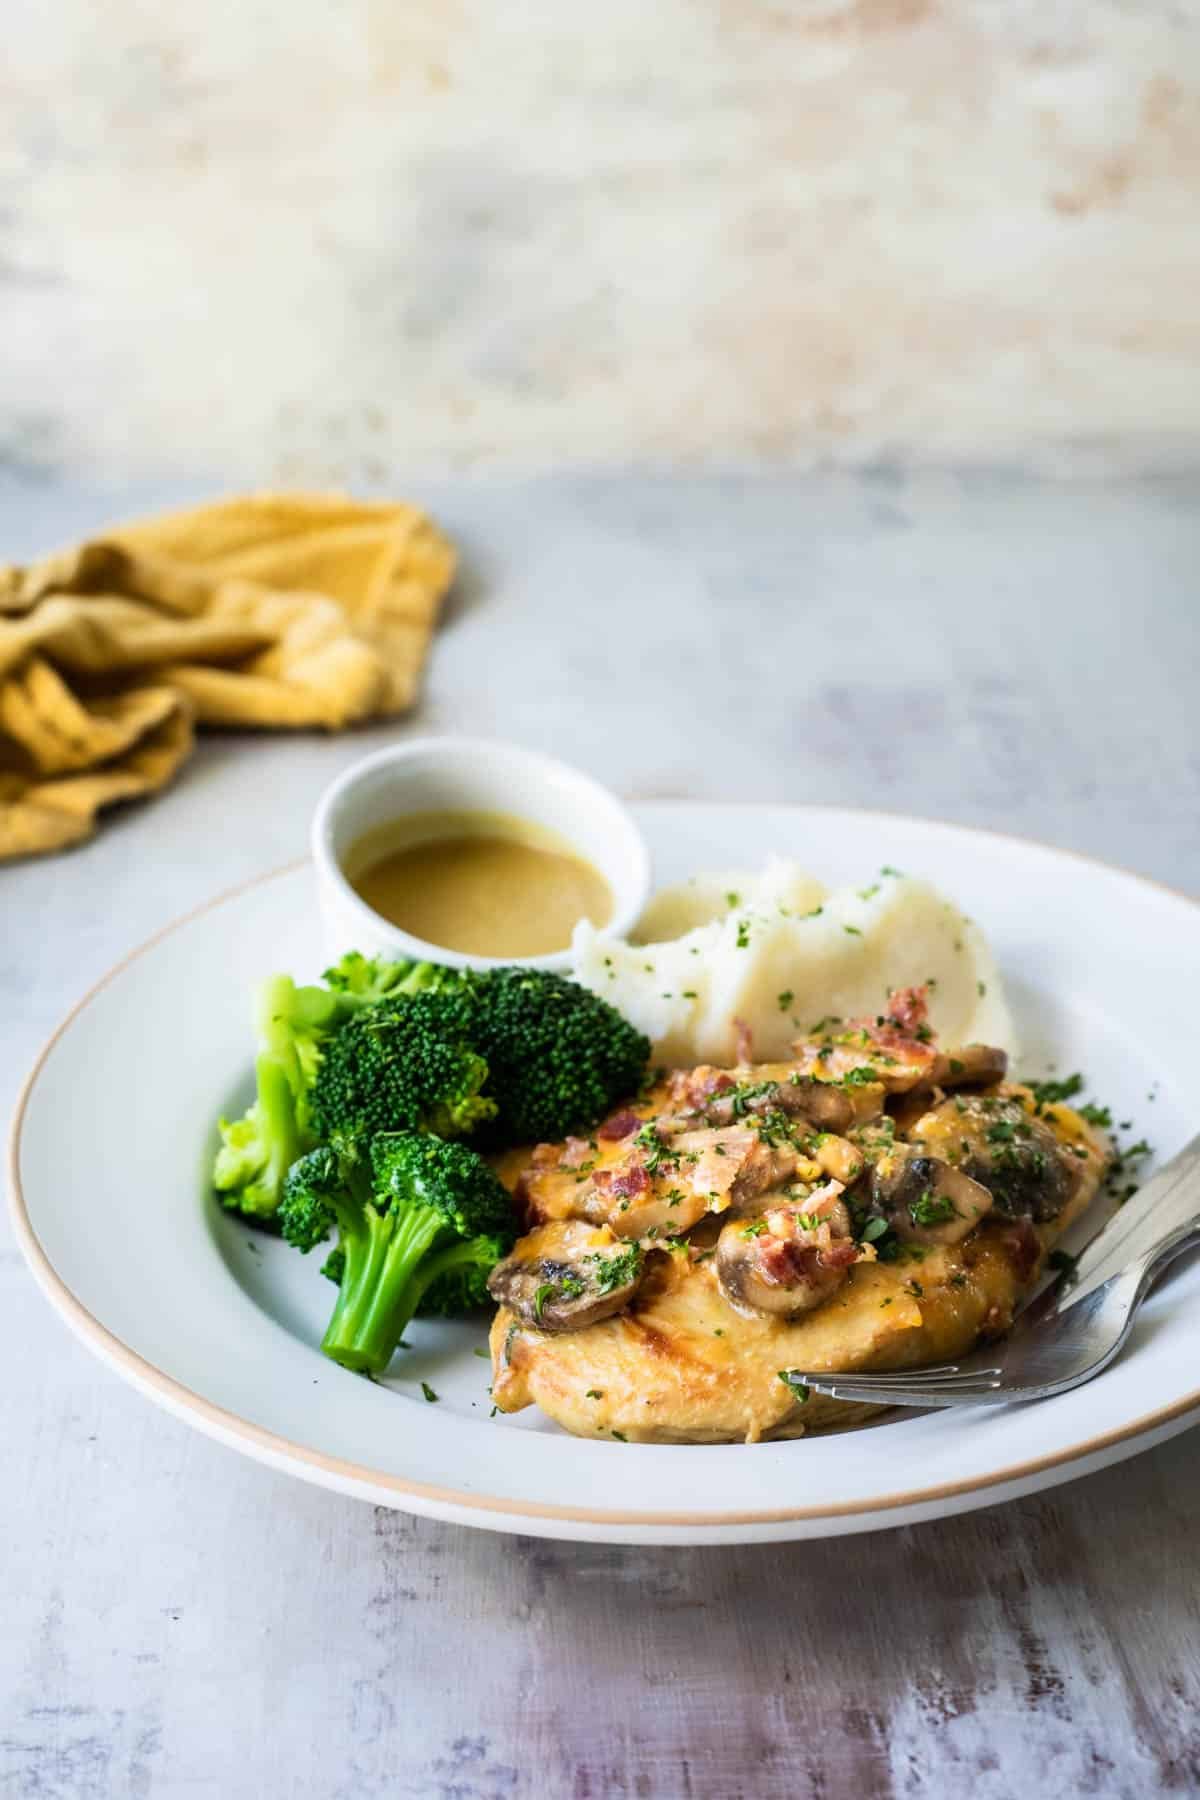 Alice Springs chicken on a white plate with sides of broccoli and mashed potatoes.